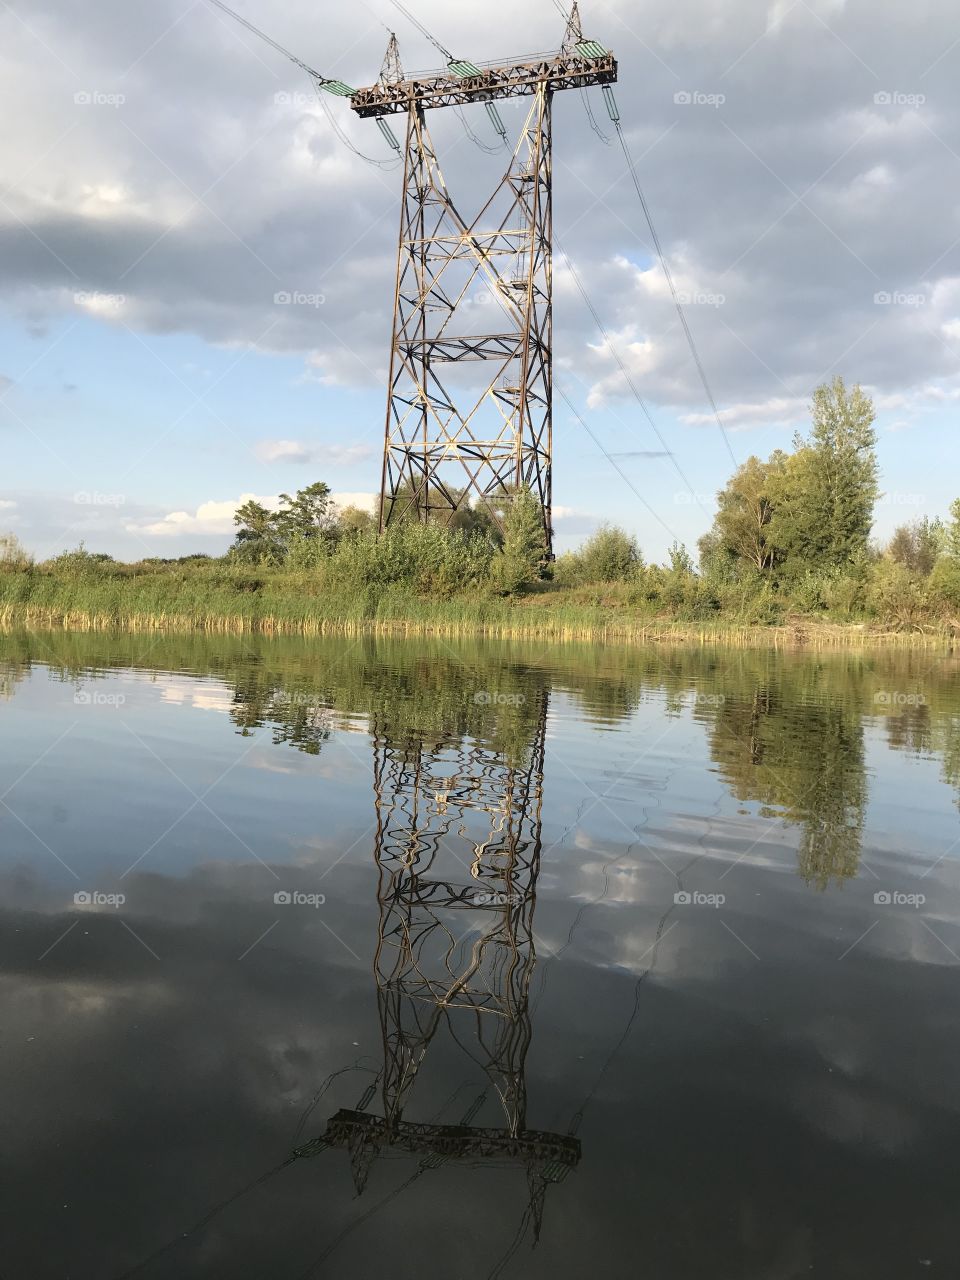 Reflection of an electric tower on the water 